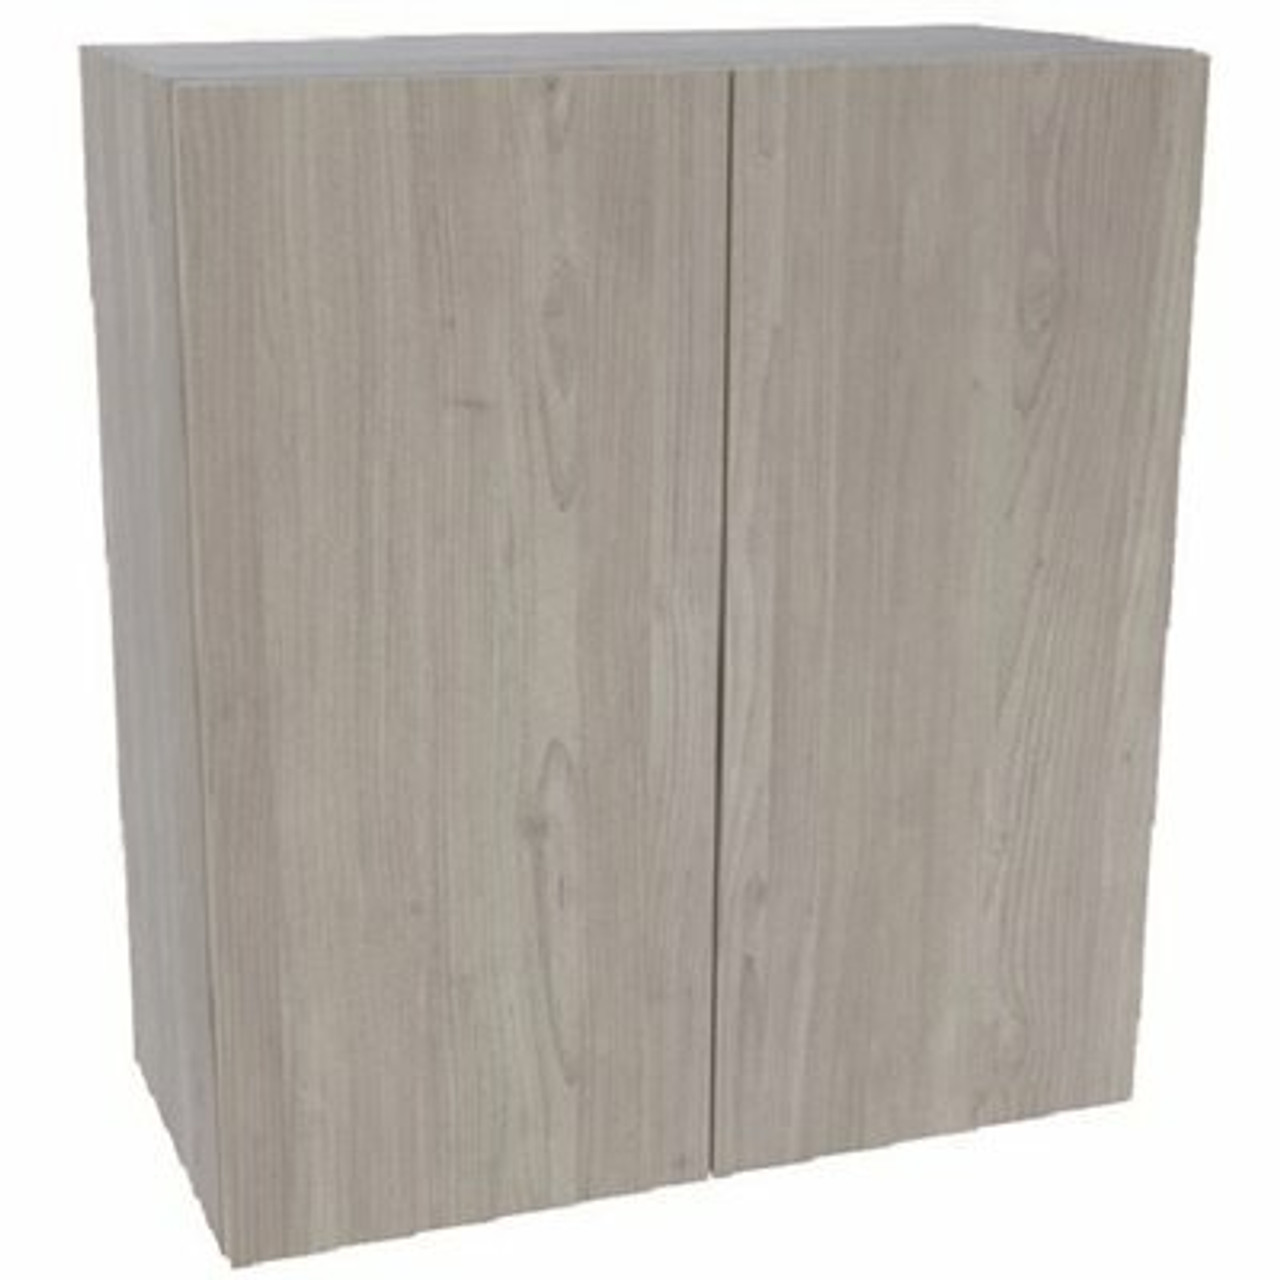 Cambridge Ready To Assemble Threespine 33 In. X 42 In. X 12 In. Stock Wall Cabinet In Grey Nordic